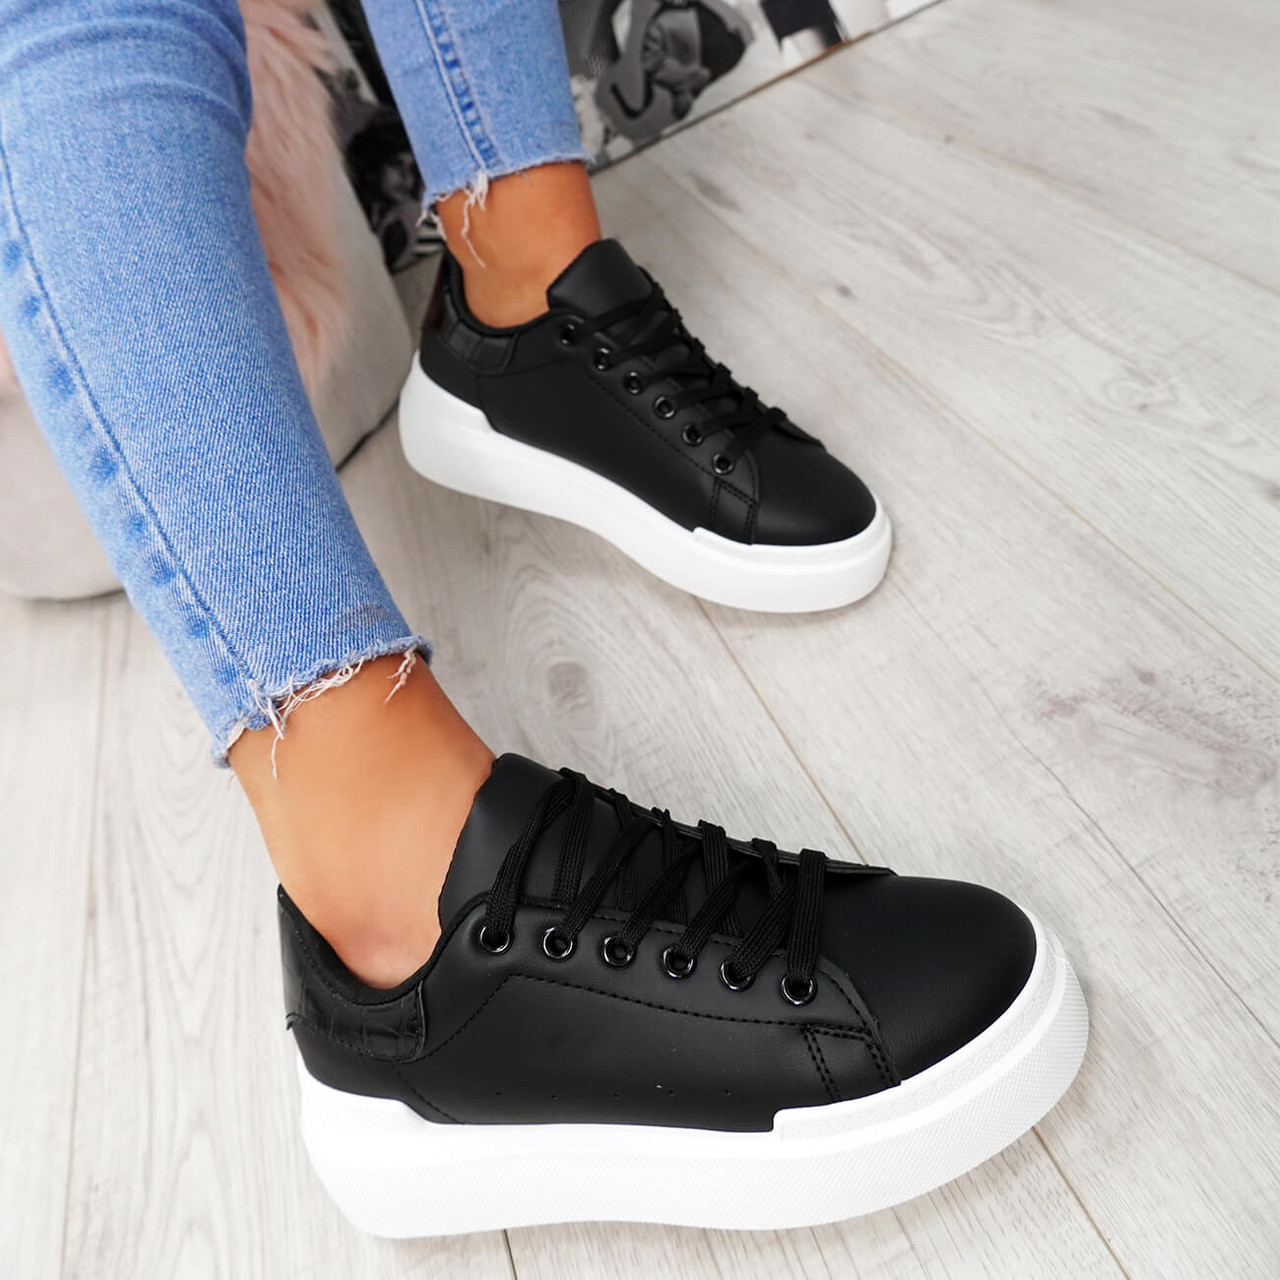 comfy black trainers